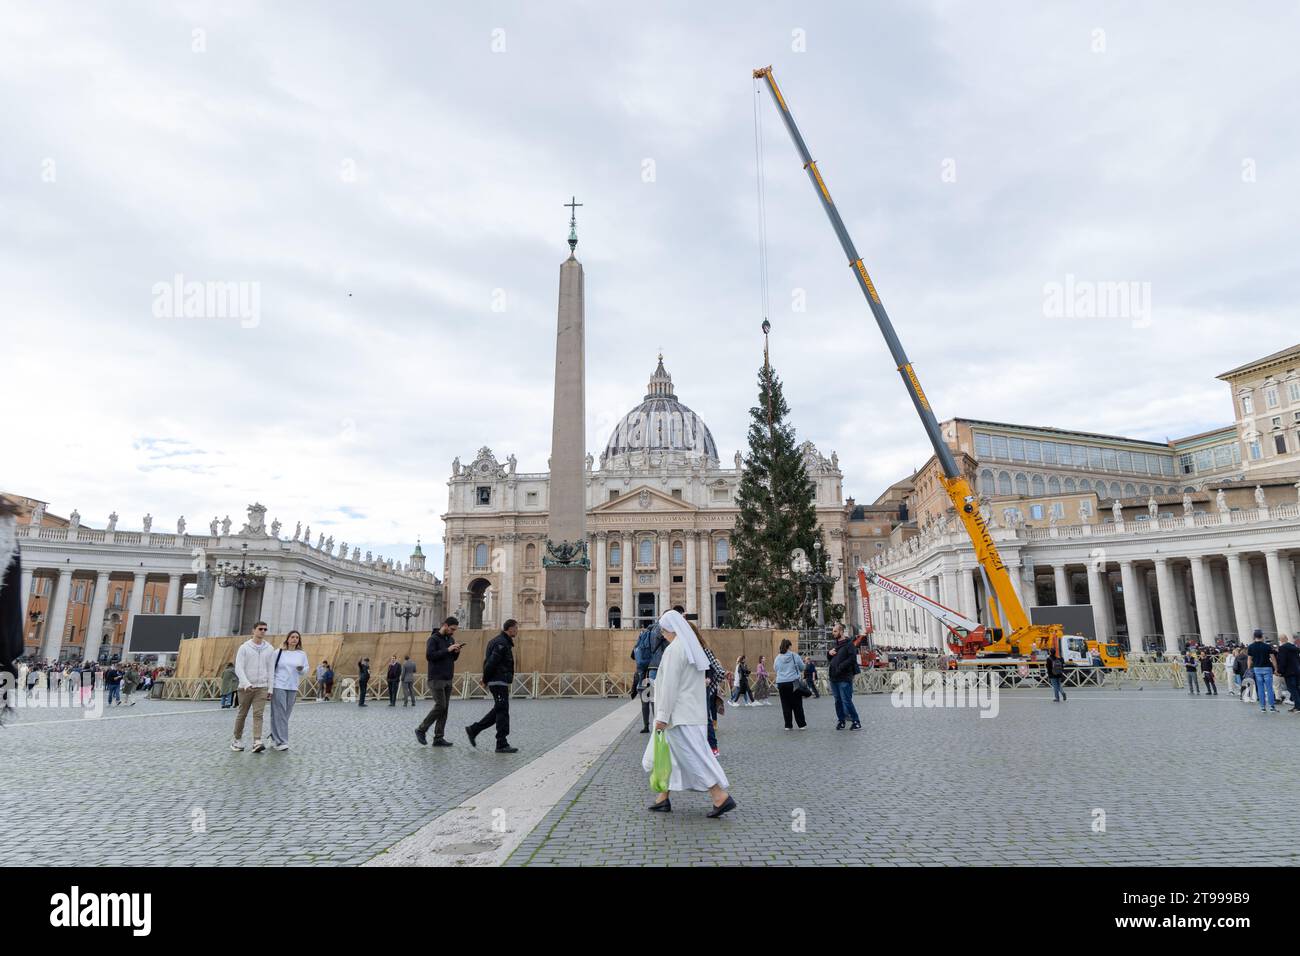 Rome, Italy. 23rd Nov, 2023. View of the installation of the Christmas tree in St. Peter's Square. The Christmas tree arrived in St. Peter's Square with 27 meters high, it weighs 6.5 tons and was donated by the municipality of Macra, in the woods of Cuneo. It will be decorated with lights and over 7,000 dried edelweiss which will give the effect of a snowfall. The lights will be turned on next December 9. (Photo by Matteo Nardone/Pacific Press) Credit: Pacific Press Media Production Corp./Alamy Live News Stock Photo